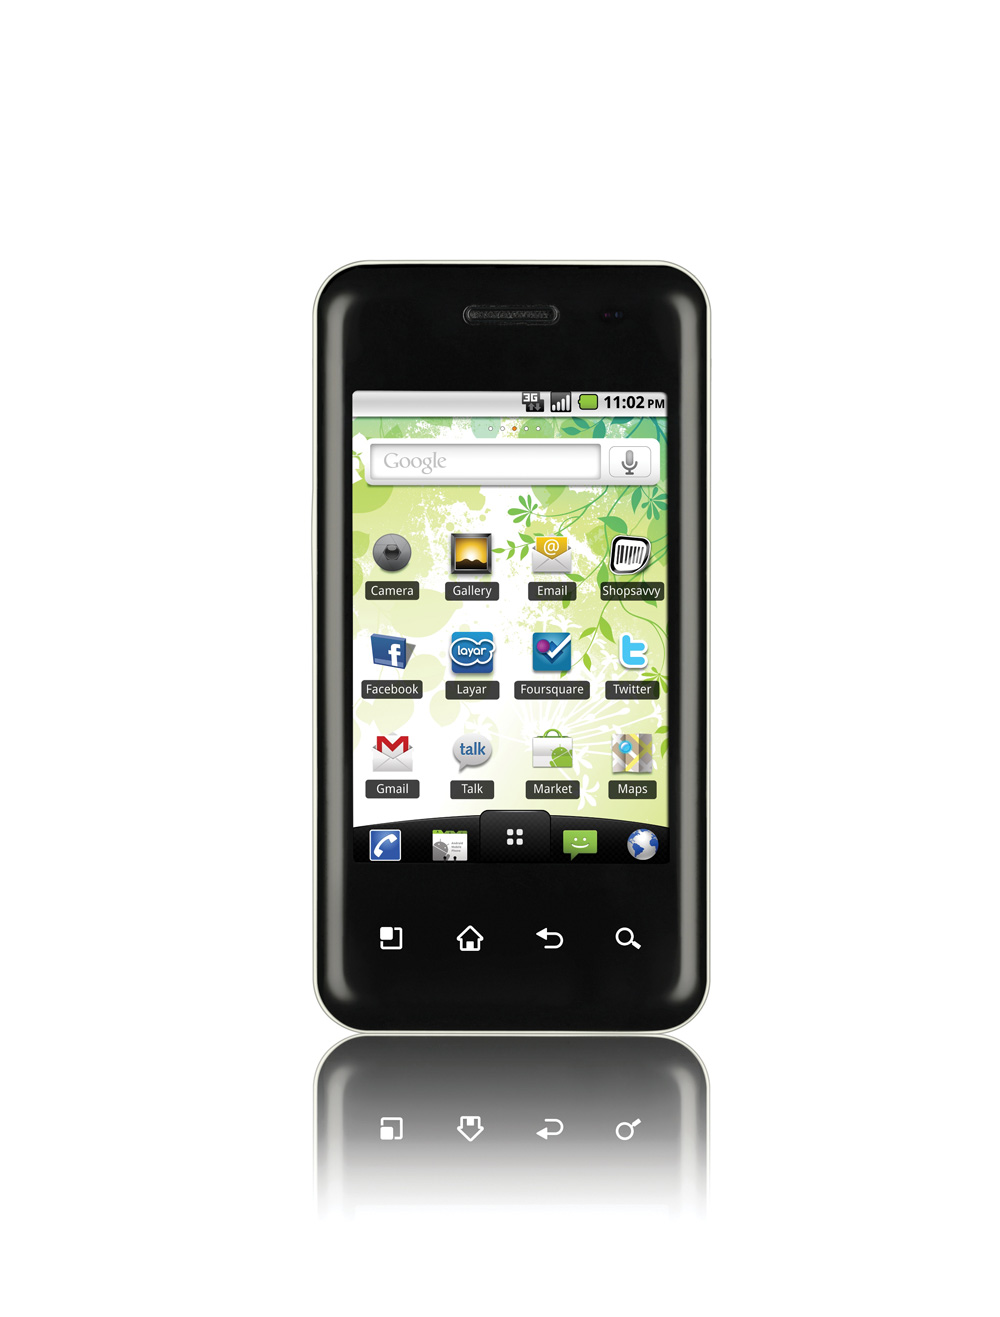 Front view of the LG Optimus Chic